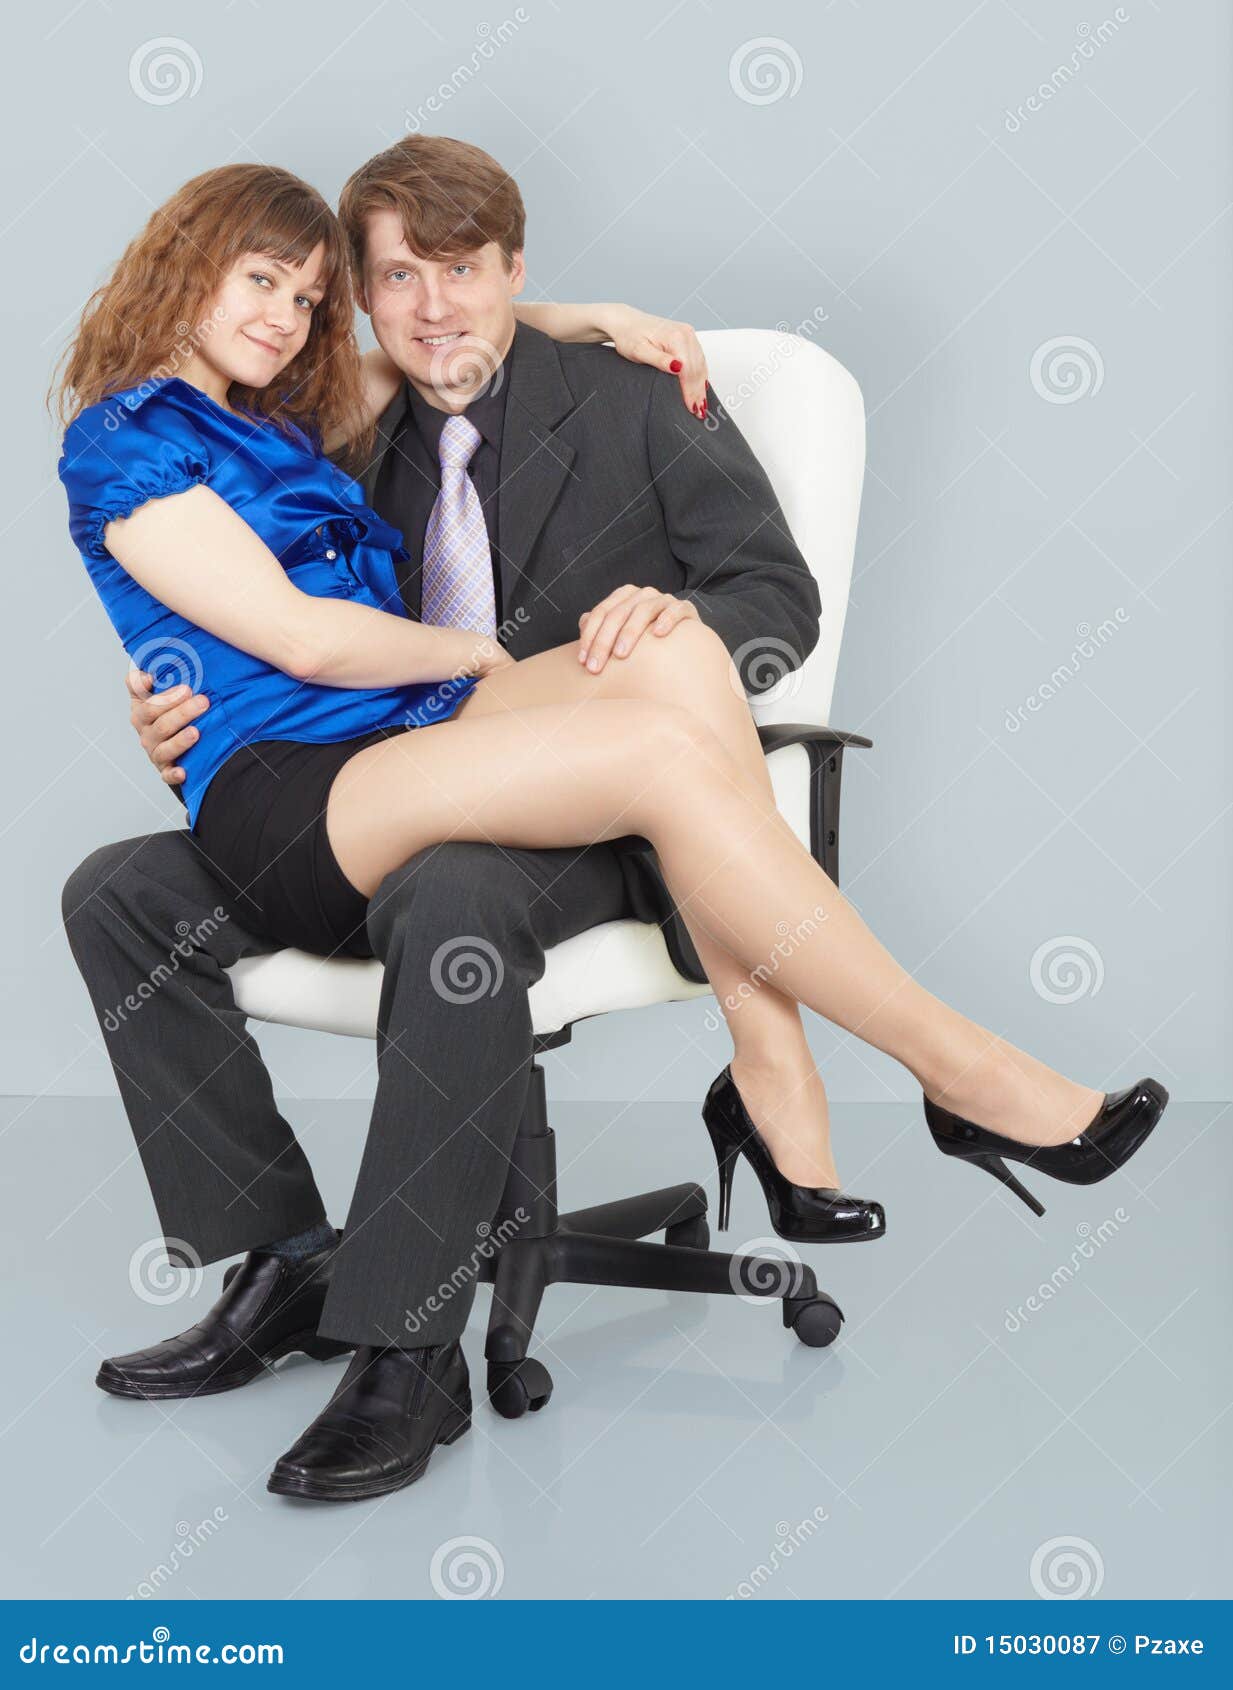 Young Woman Sitting On Lap Of A Man Sto